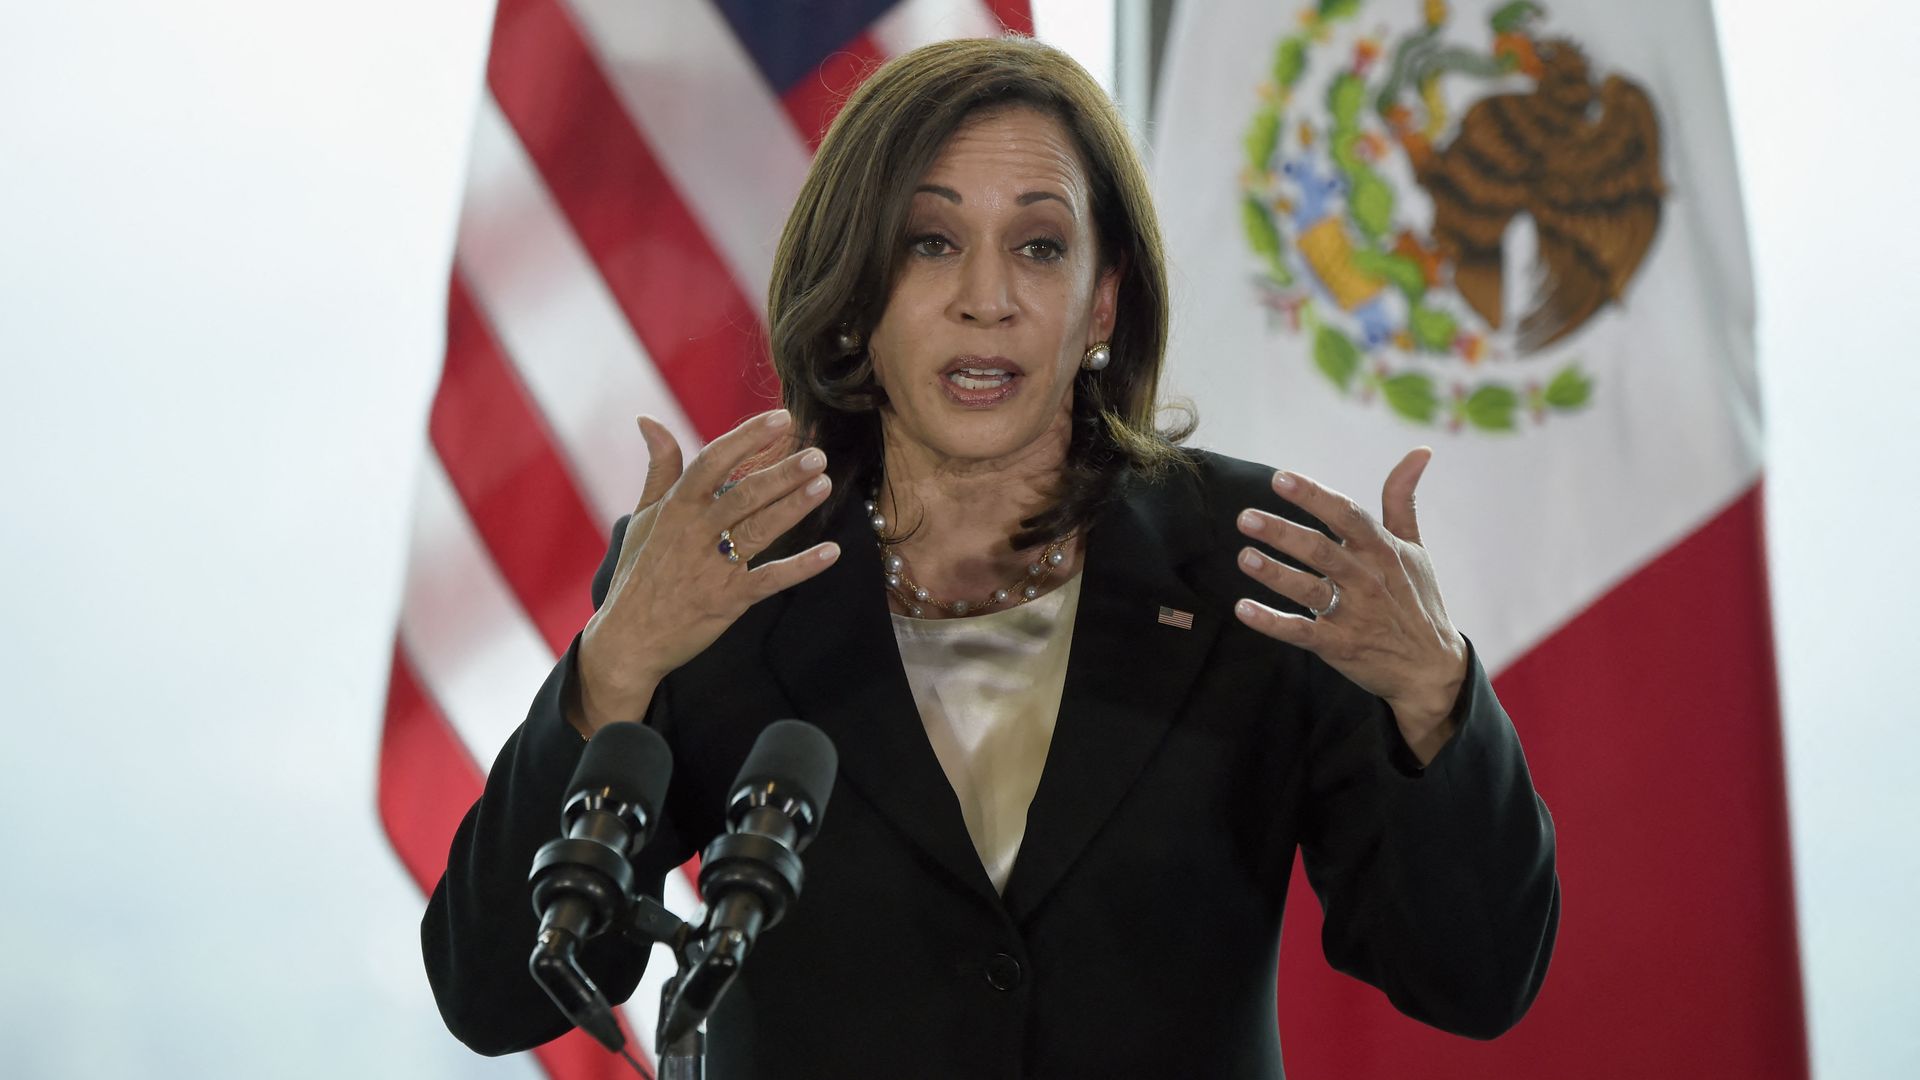 Vice President Kamala Harris is seen speaking during a news conference today.